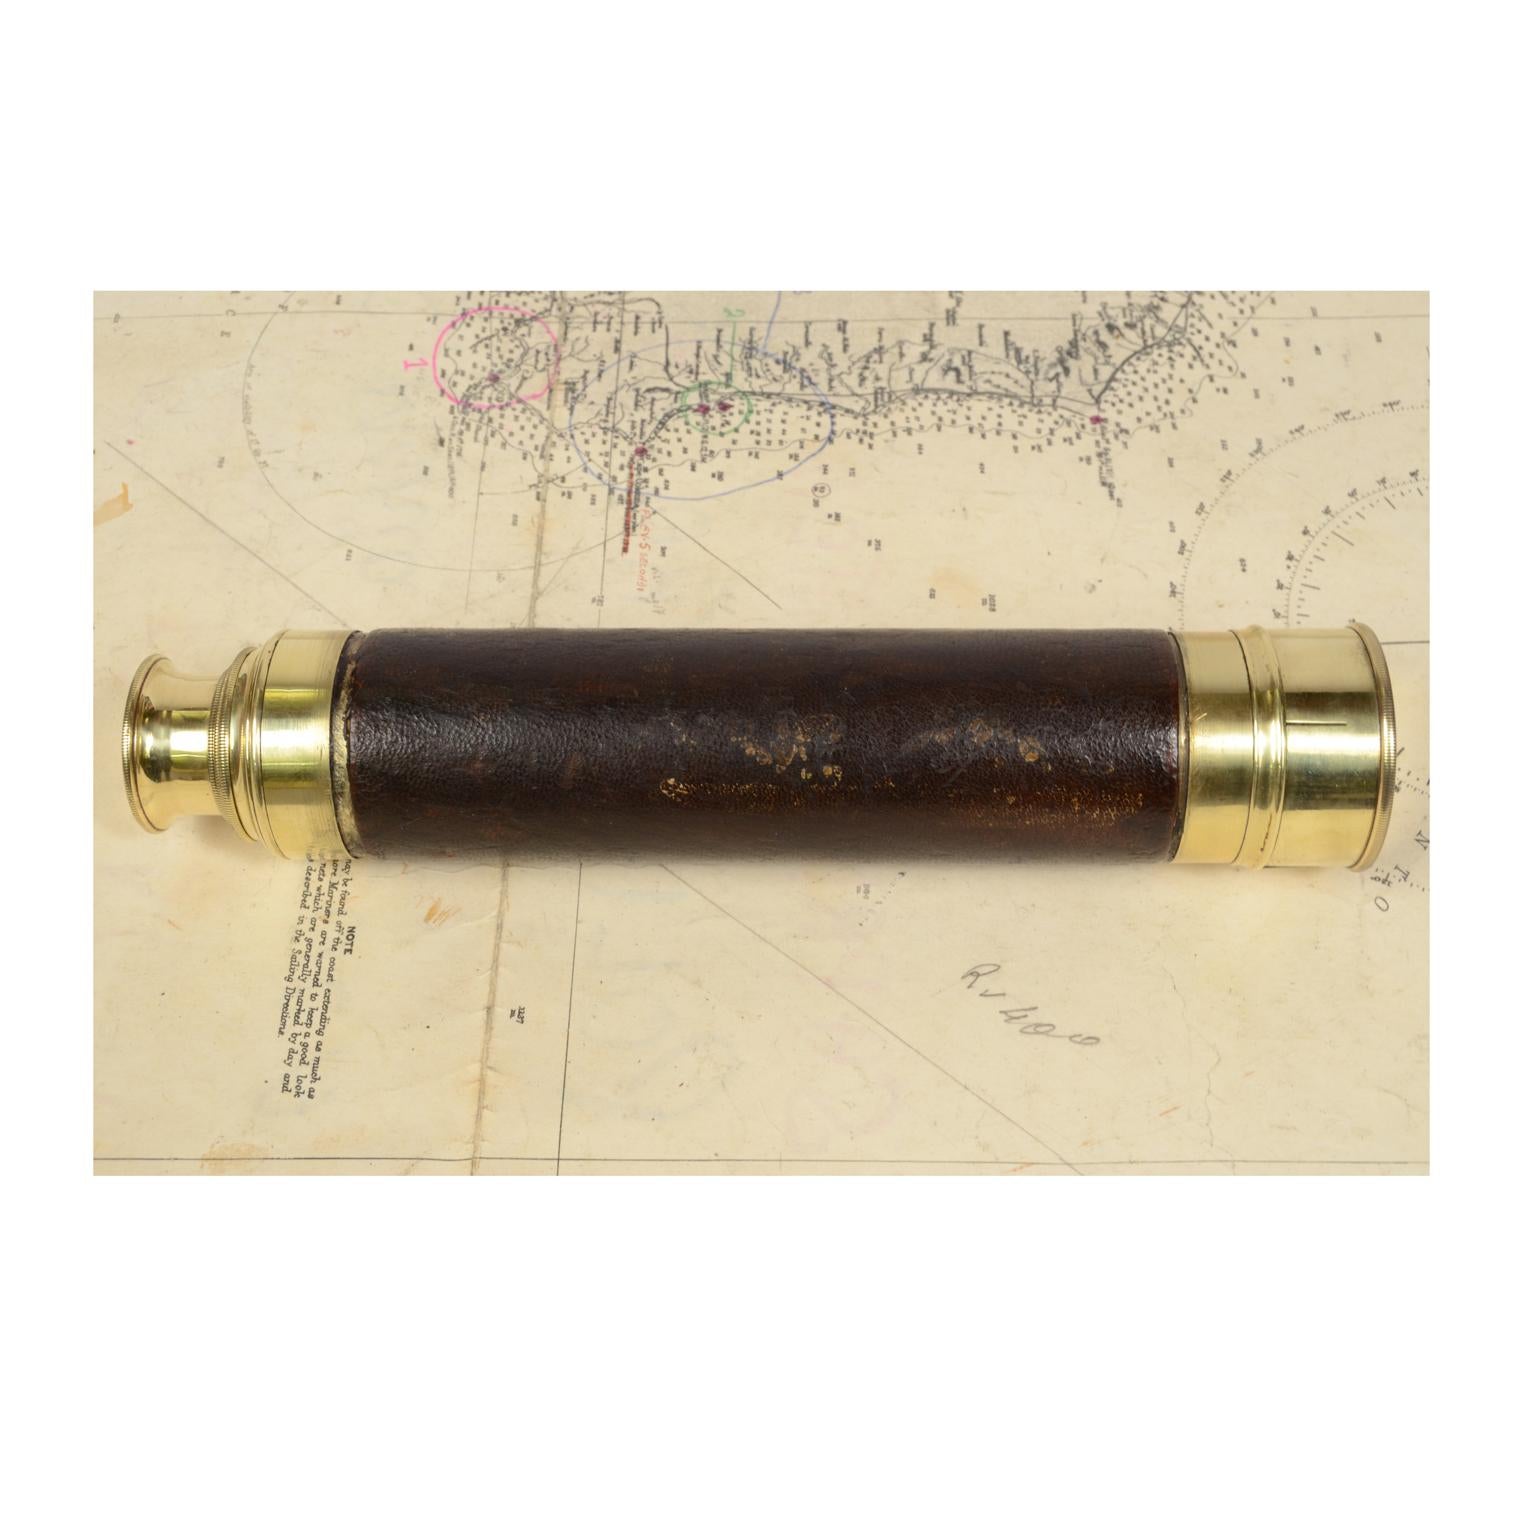 Late 19th Century Antique Nautical Telescope, Brass and Leather, 1870